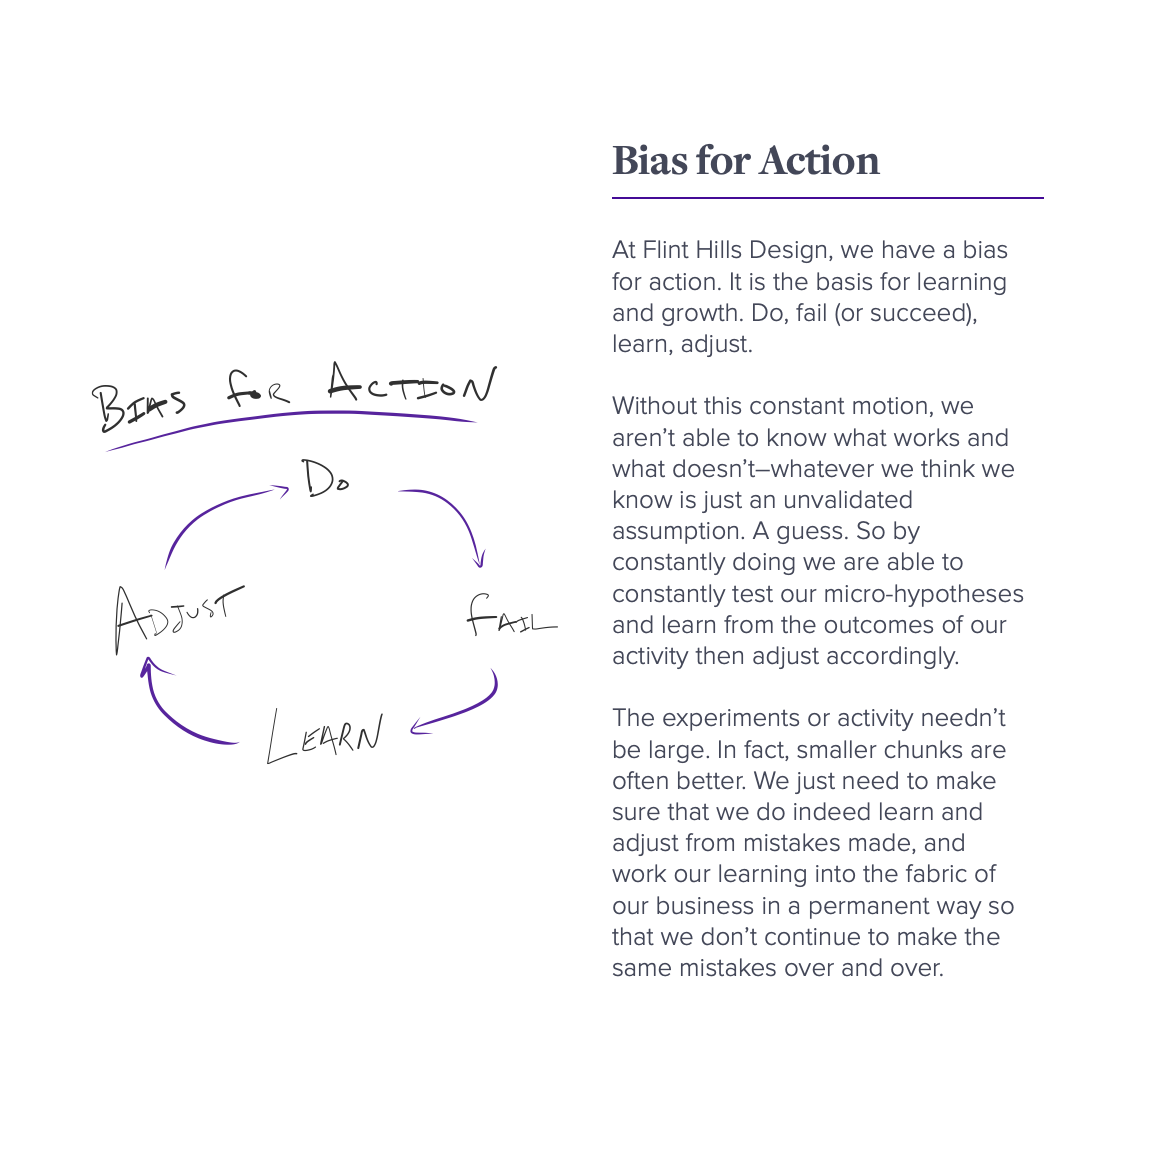 Bias for Action